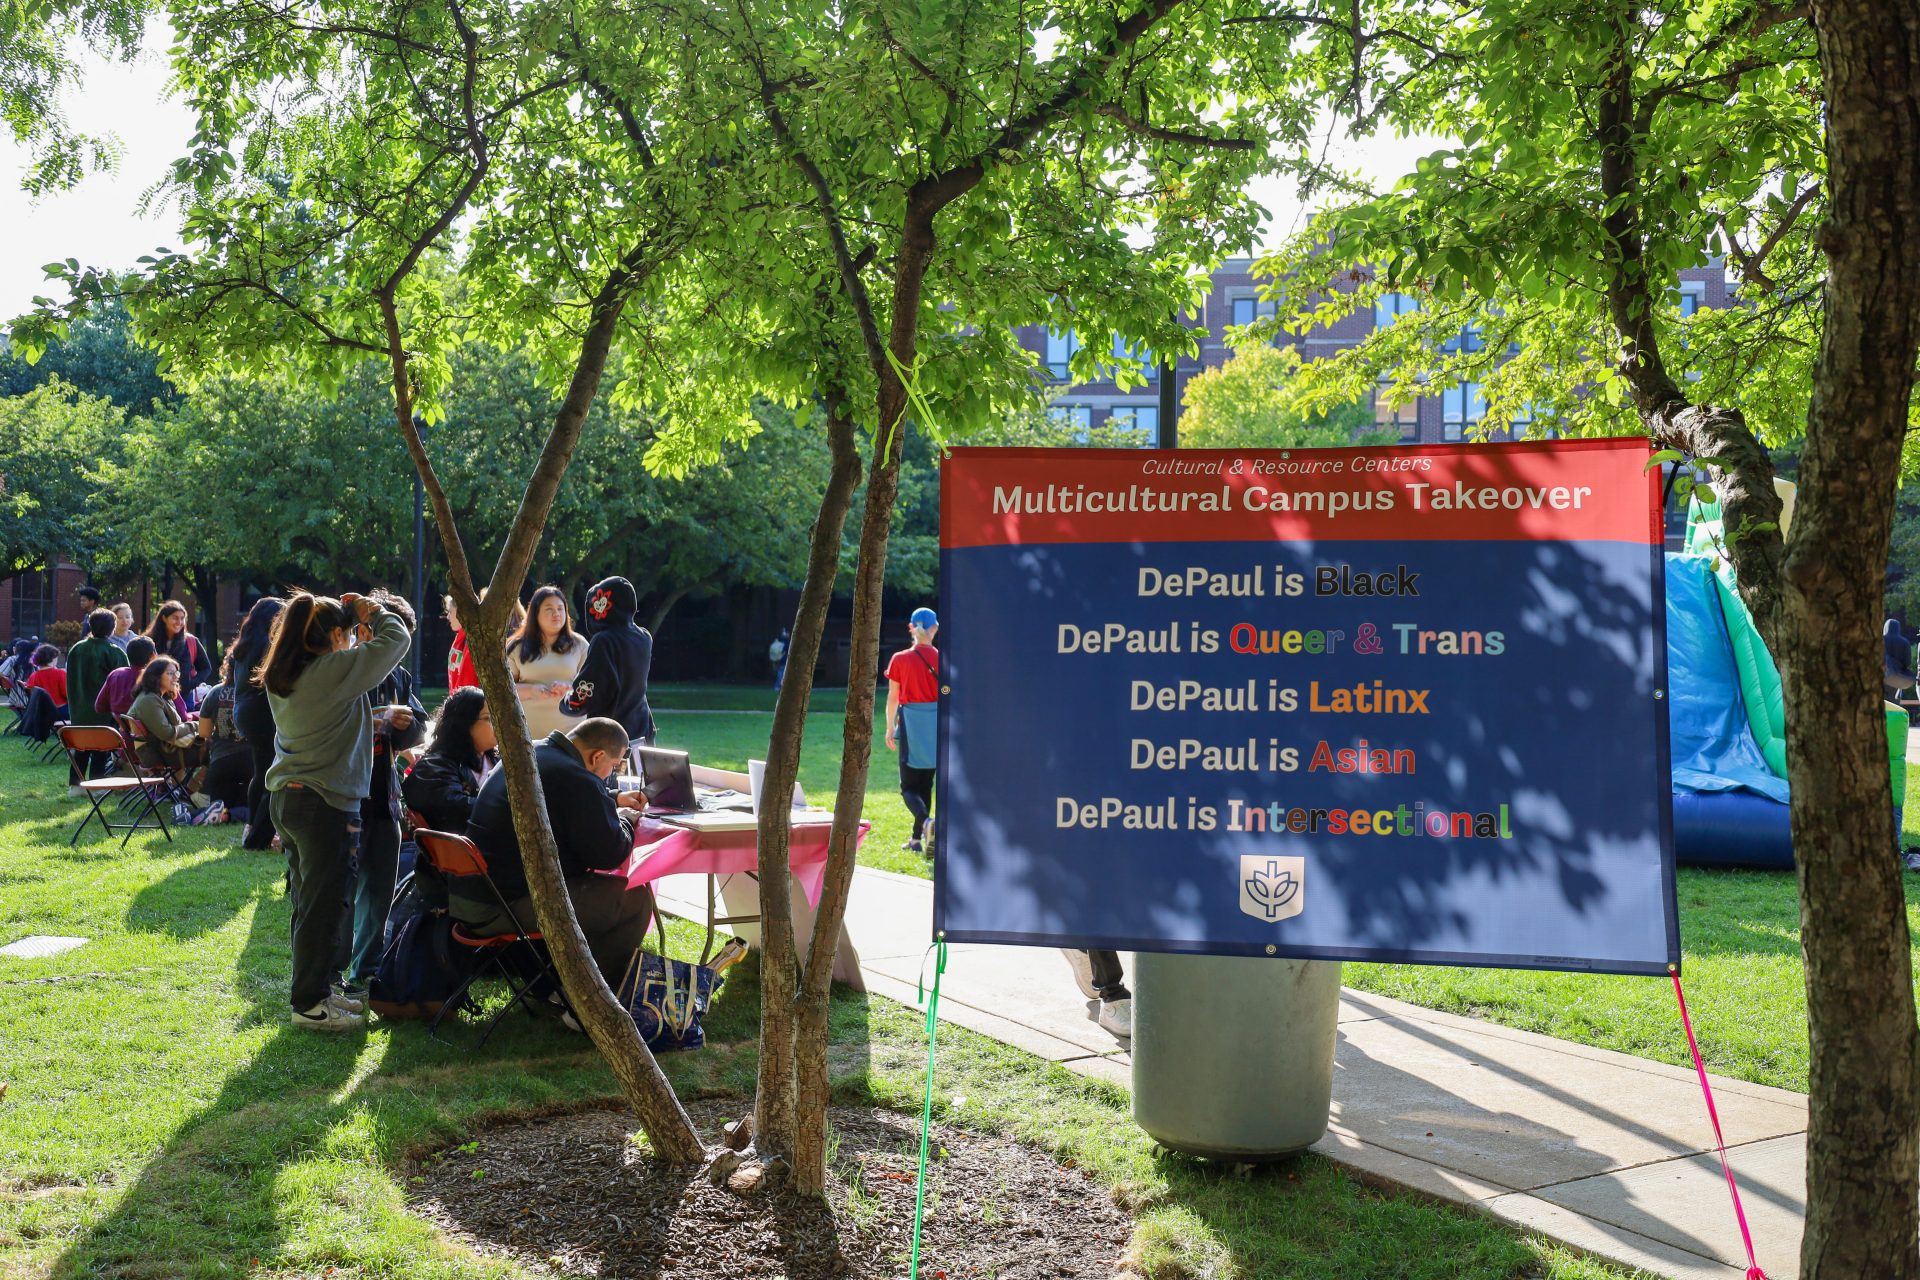 Students gather on the quad to check out the different organizations present at the Cultural Student Organization Fest, one of the featured activities of the 2023 Multicultural Campus Takeover. 